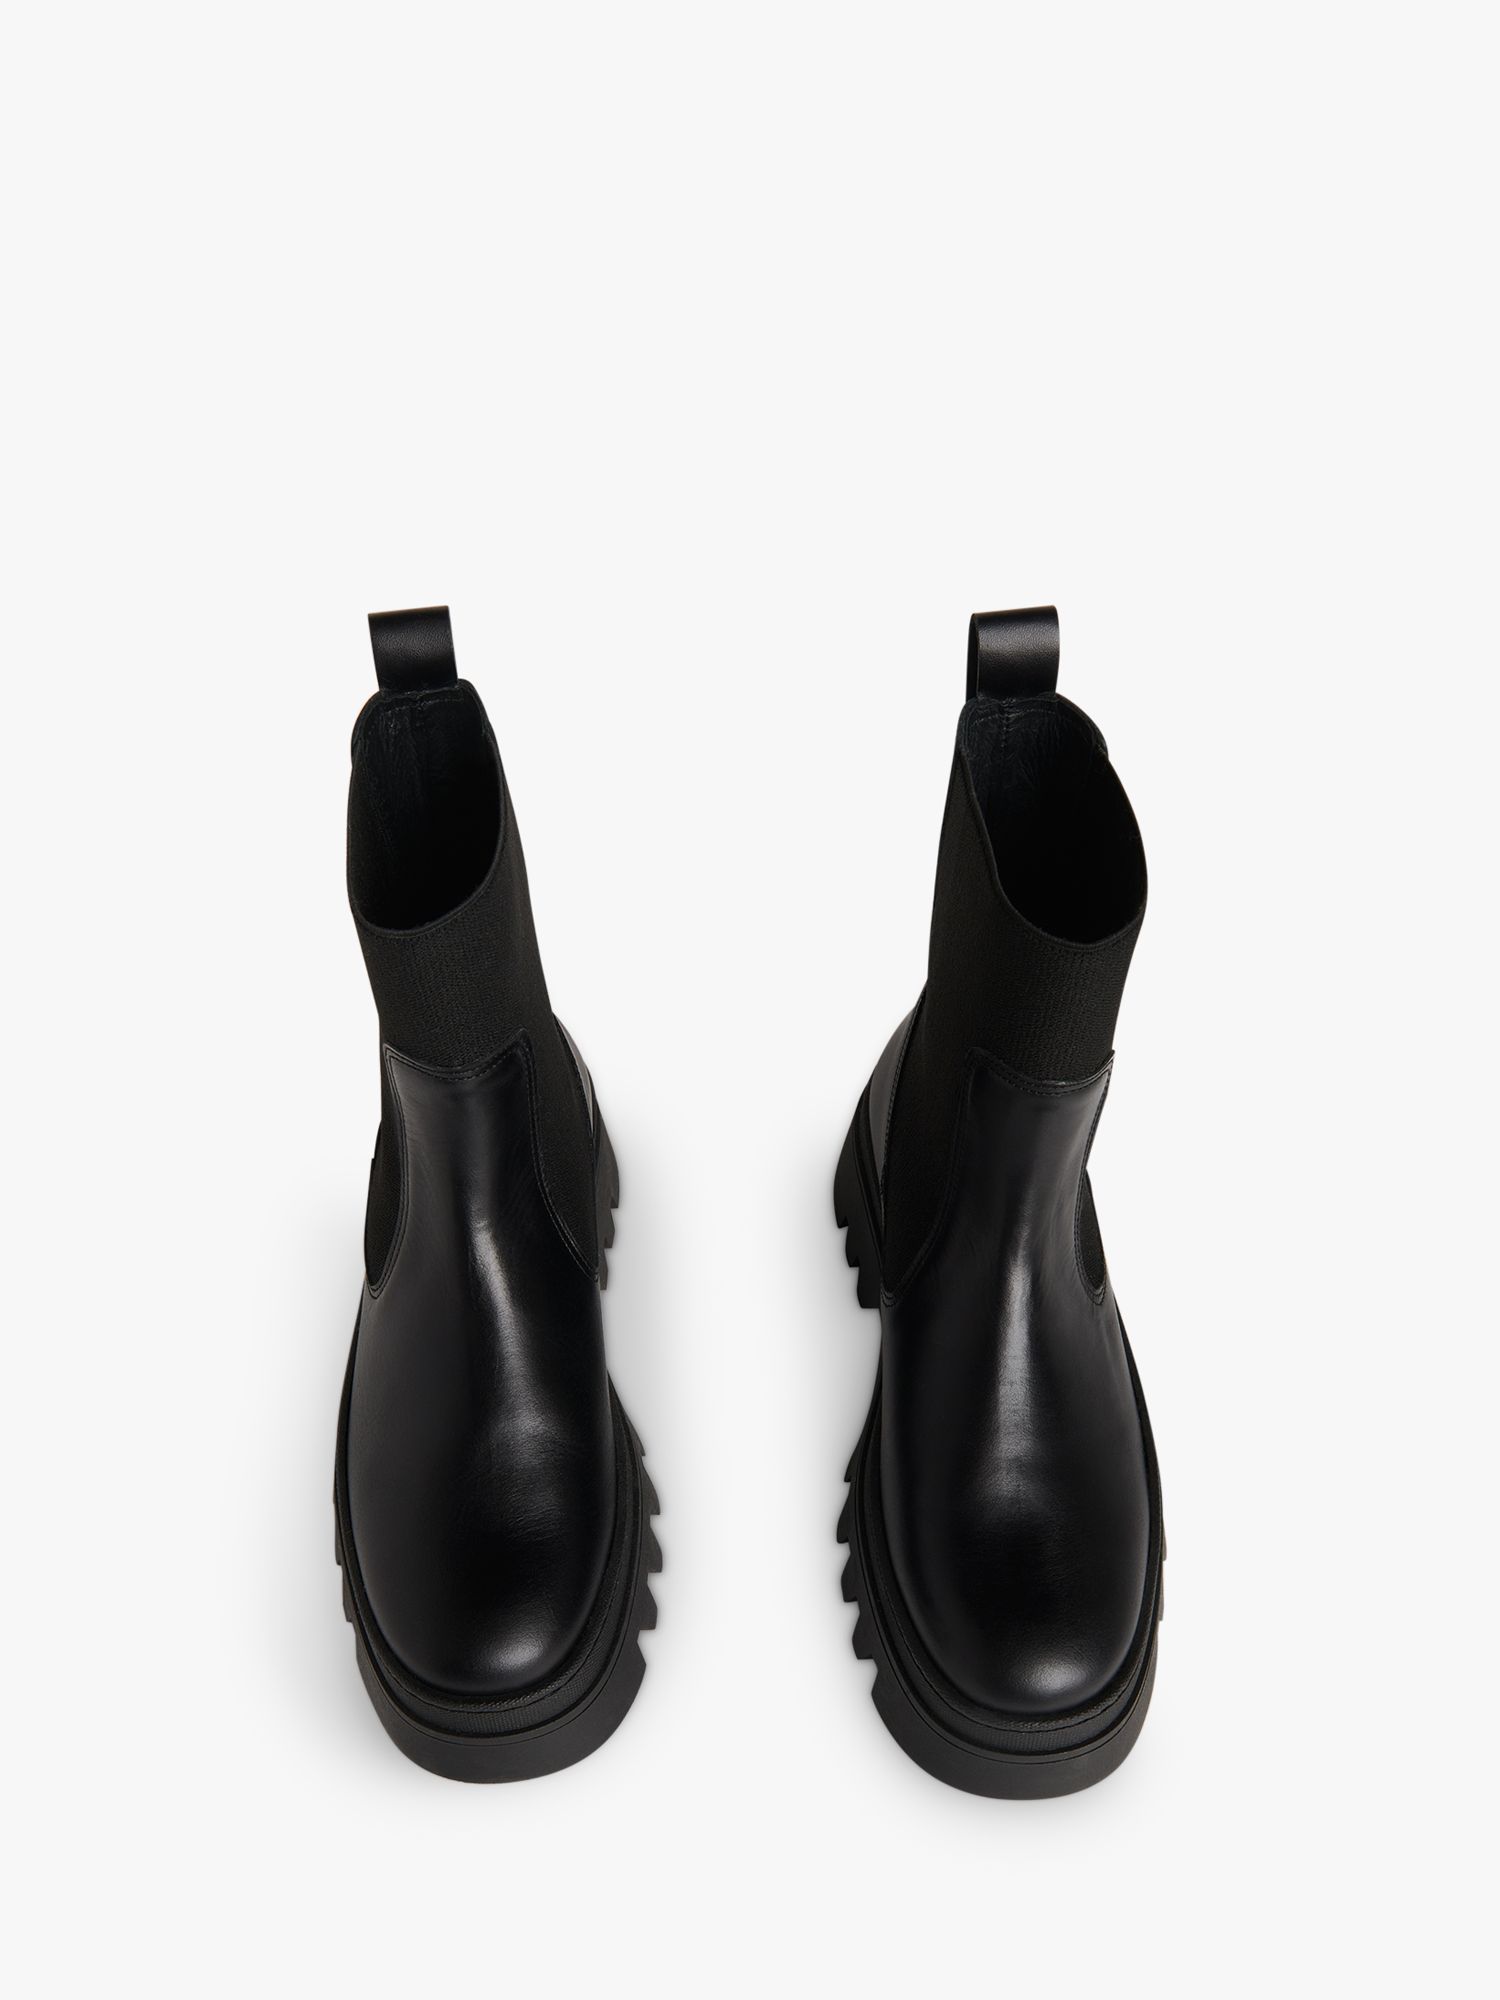 Whistles Hatton Chunky Boots, at John Lewis & Partners